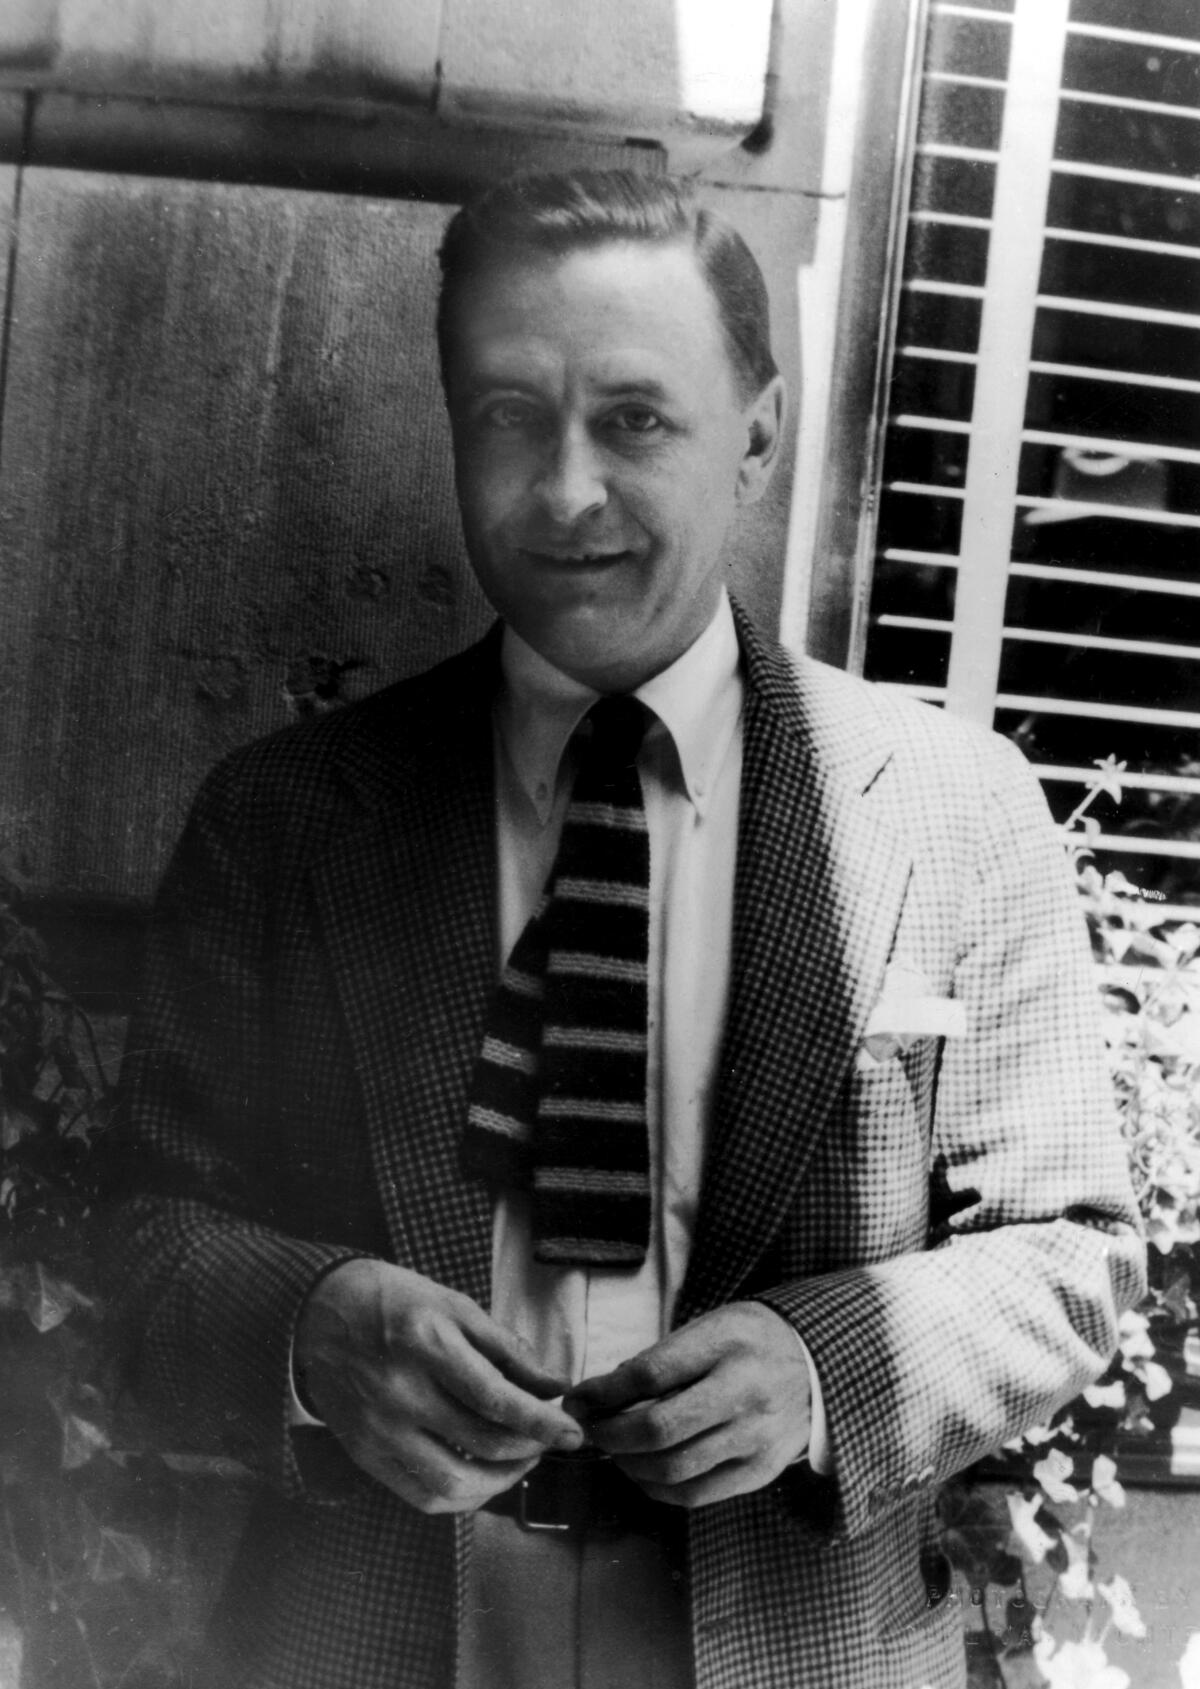 A black-and-white portrait of author F. Scott Fitzgerald in 1937, wearing a jacket and tie.